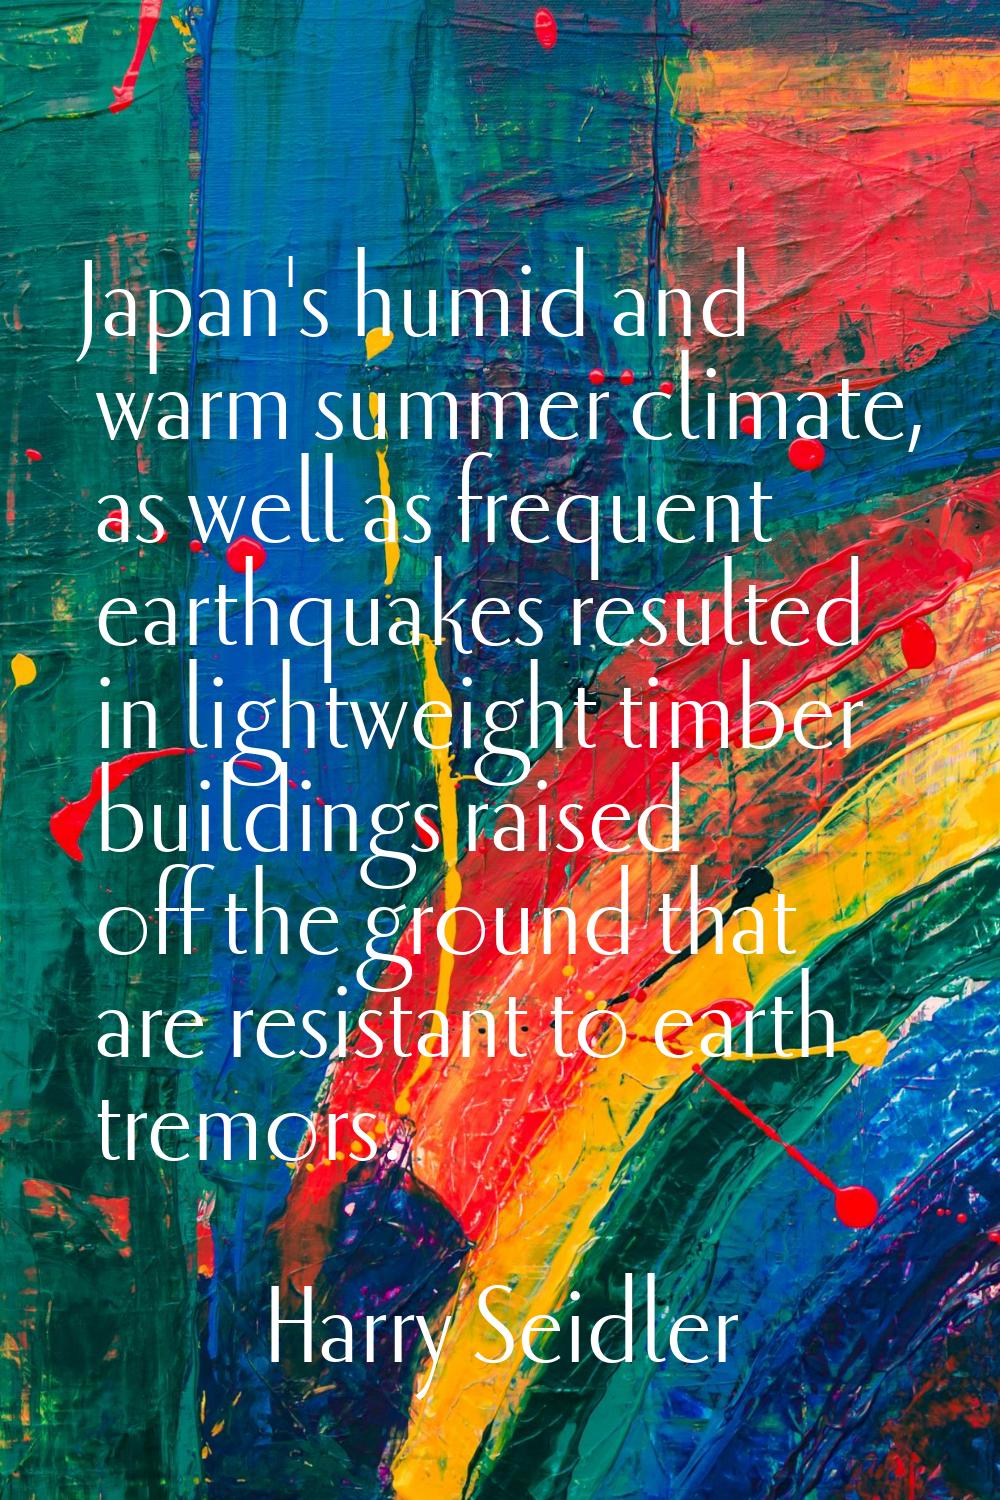 Japan's humid and warm summer climate, as well as frequent earthquakes resulted in lightweight timb